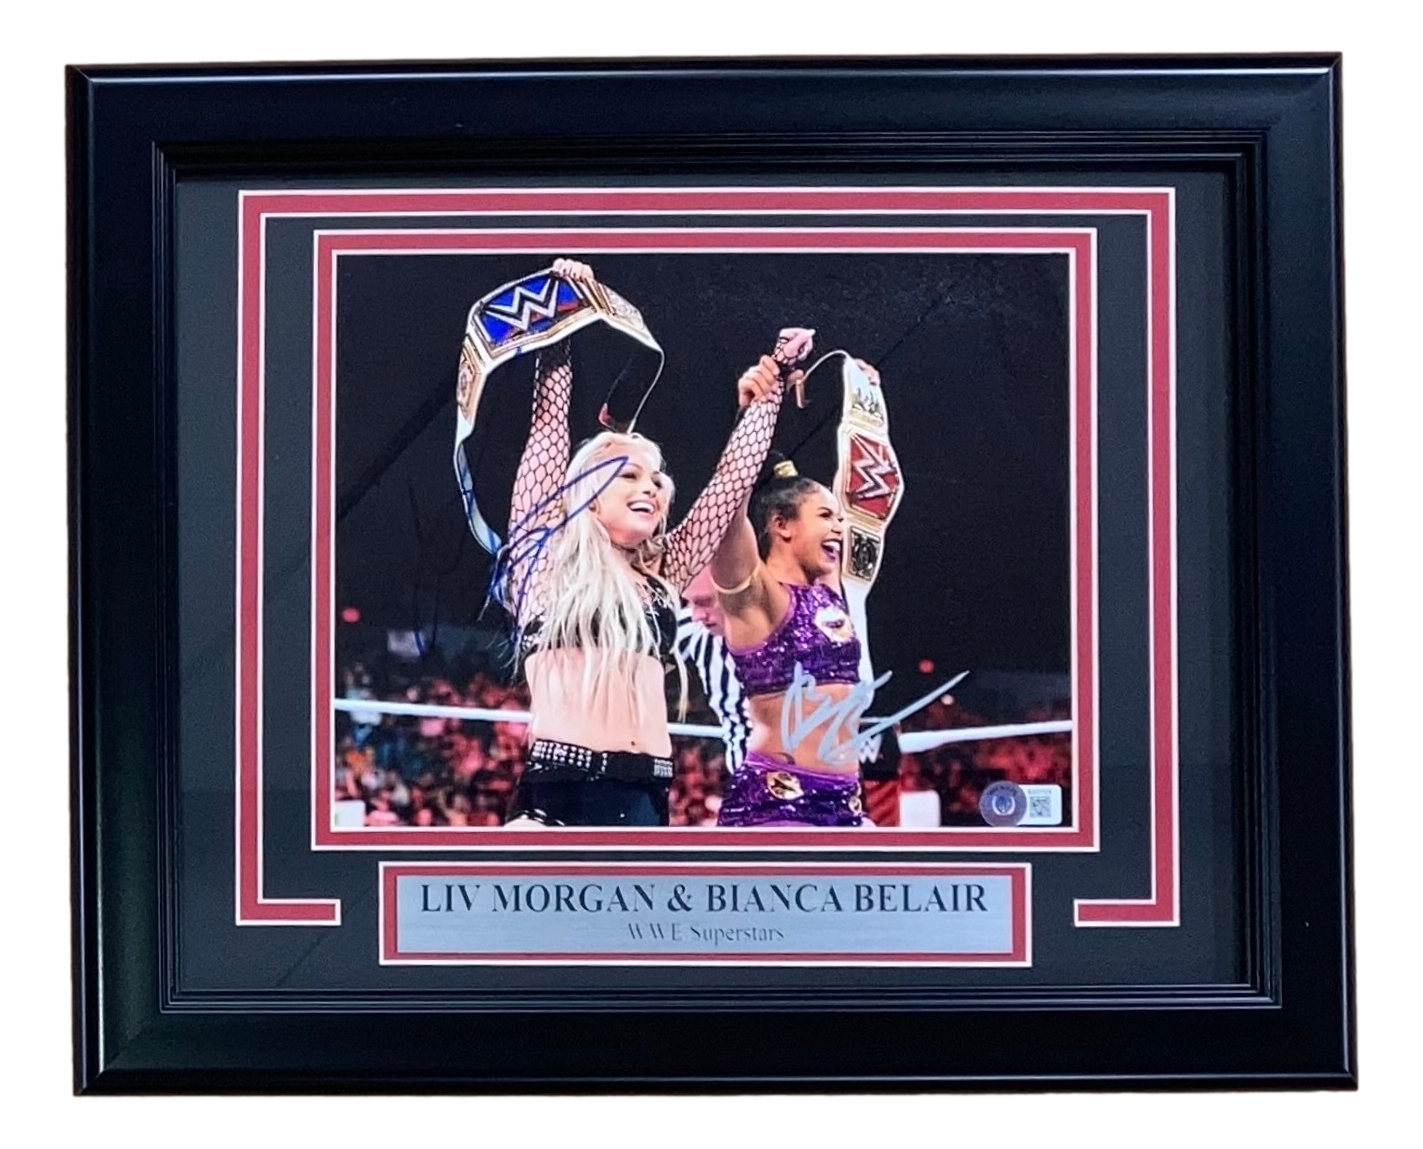 Primary image for Biance Belair Liv Morgan Signed Framed 8x10 WWE Women's Champions Photo BAS